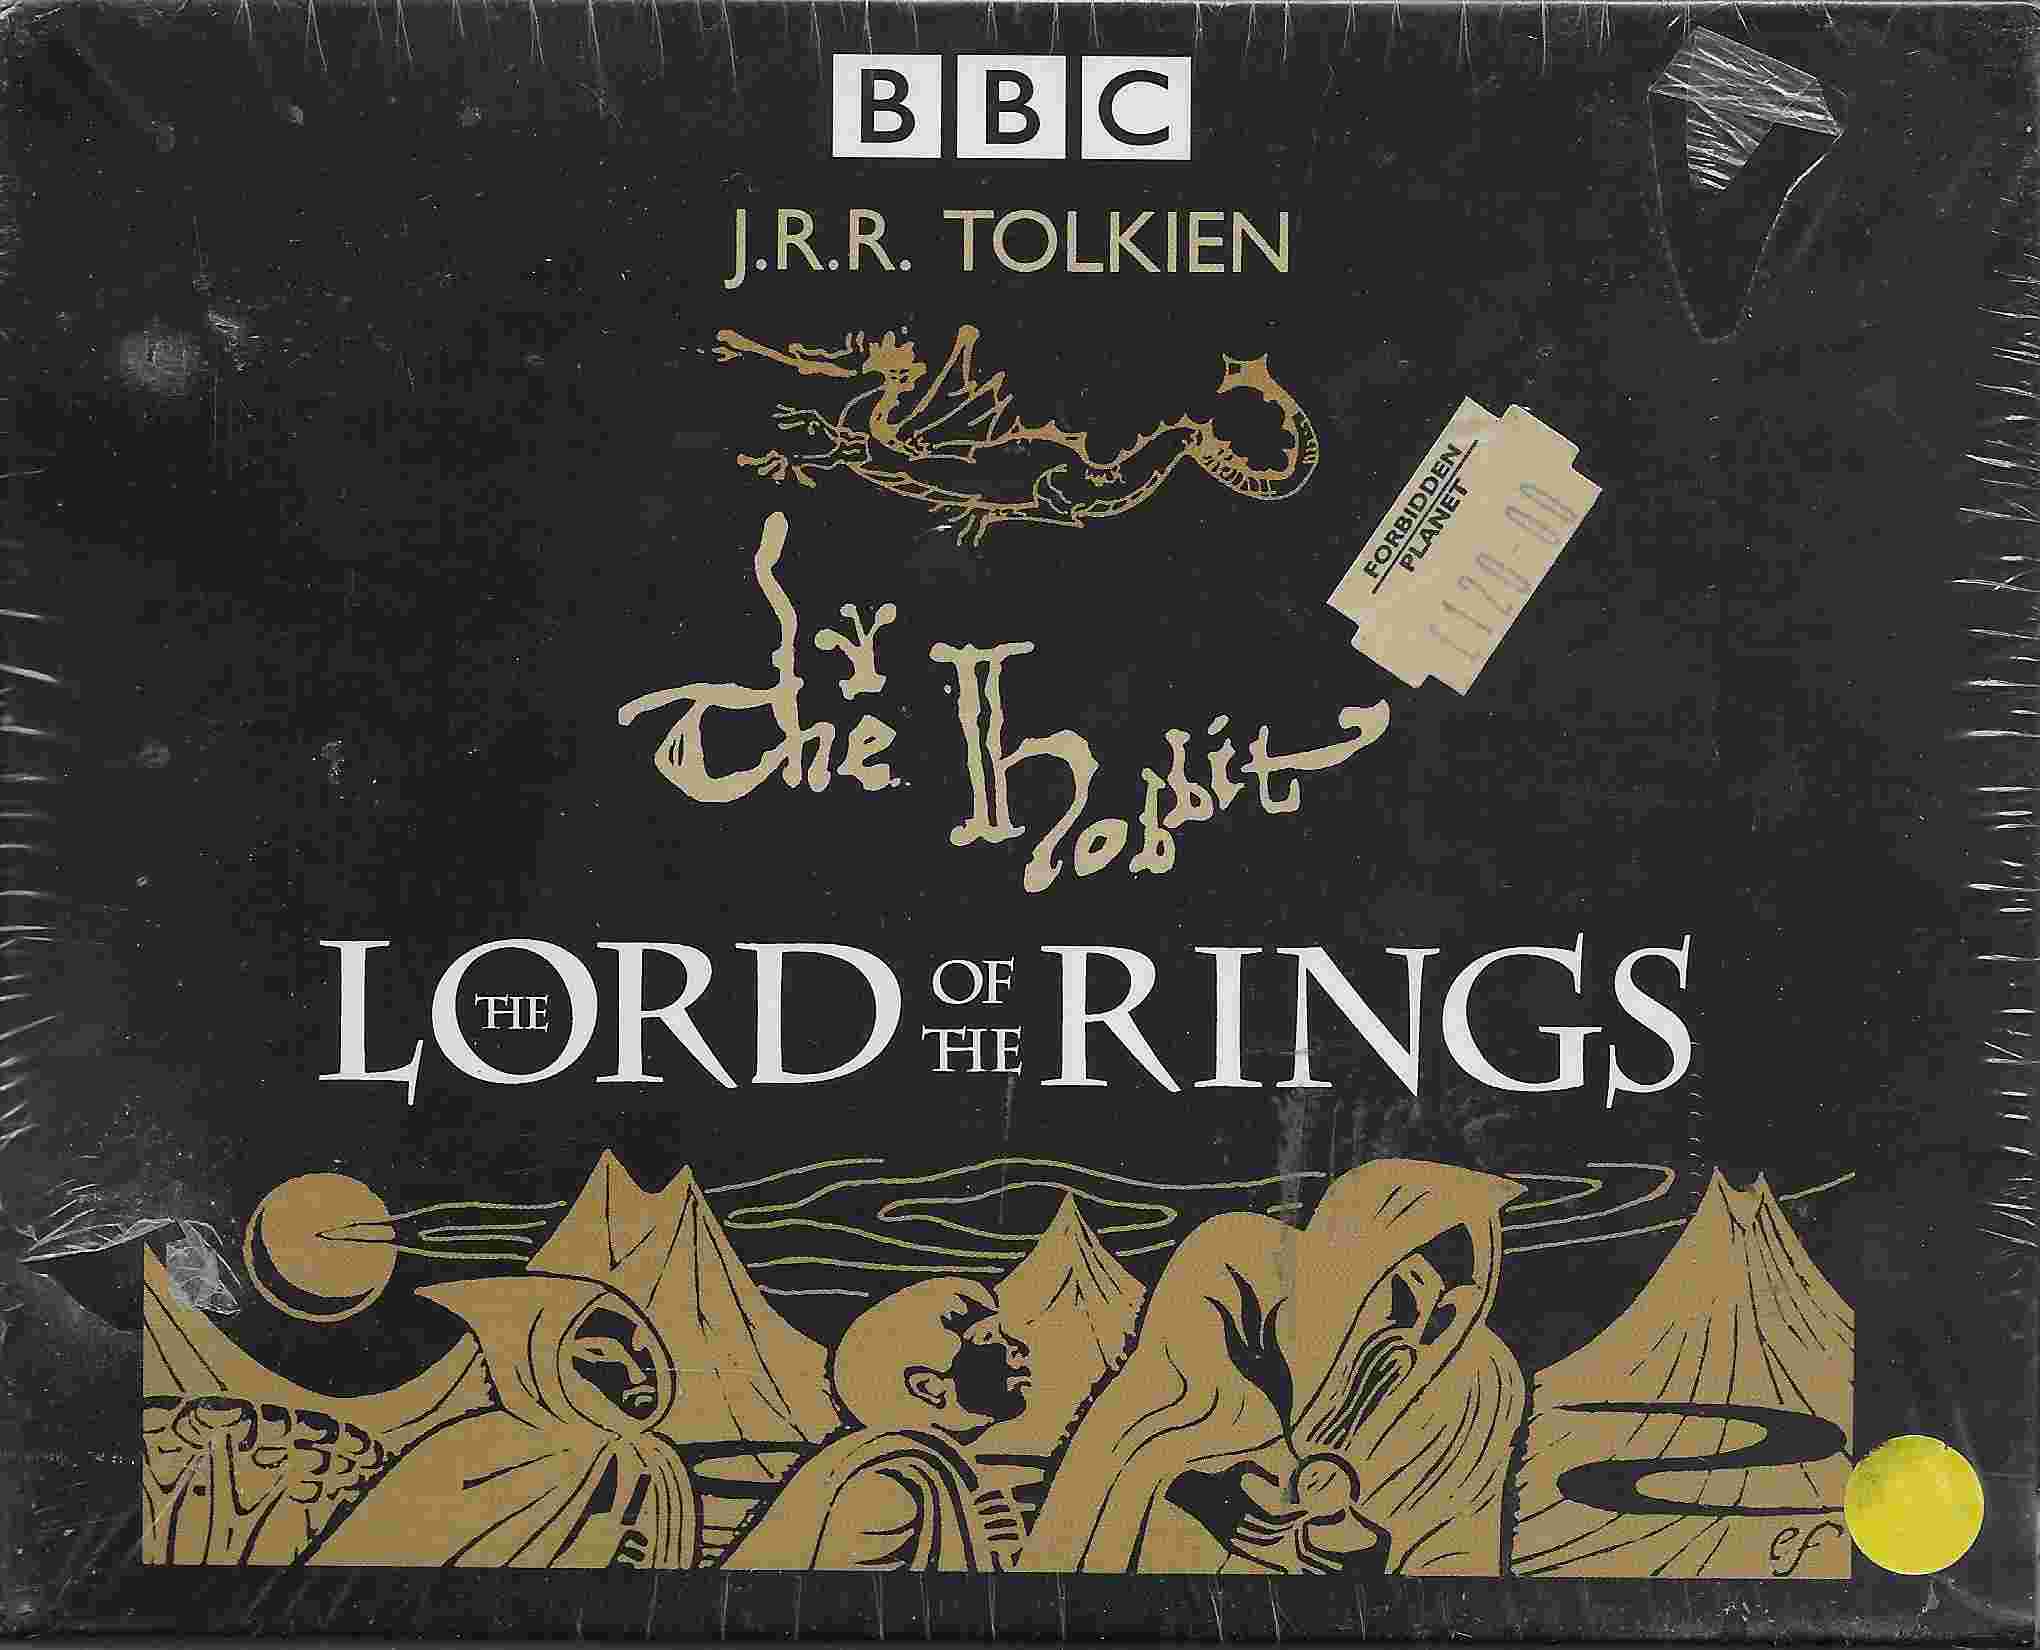 Picture of ISBN 0-563-52844-3 The hobbit / The lord of the rings by artist J. R. R. Tolkien from the BBC records and Tapes library